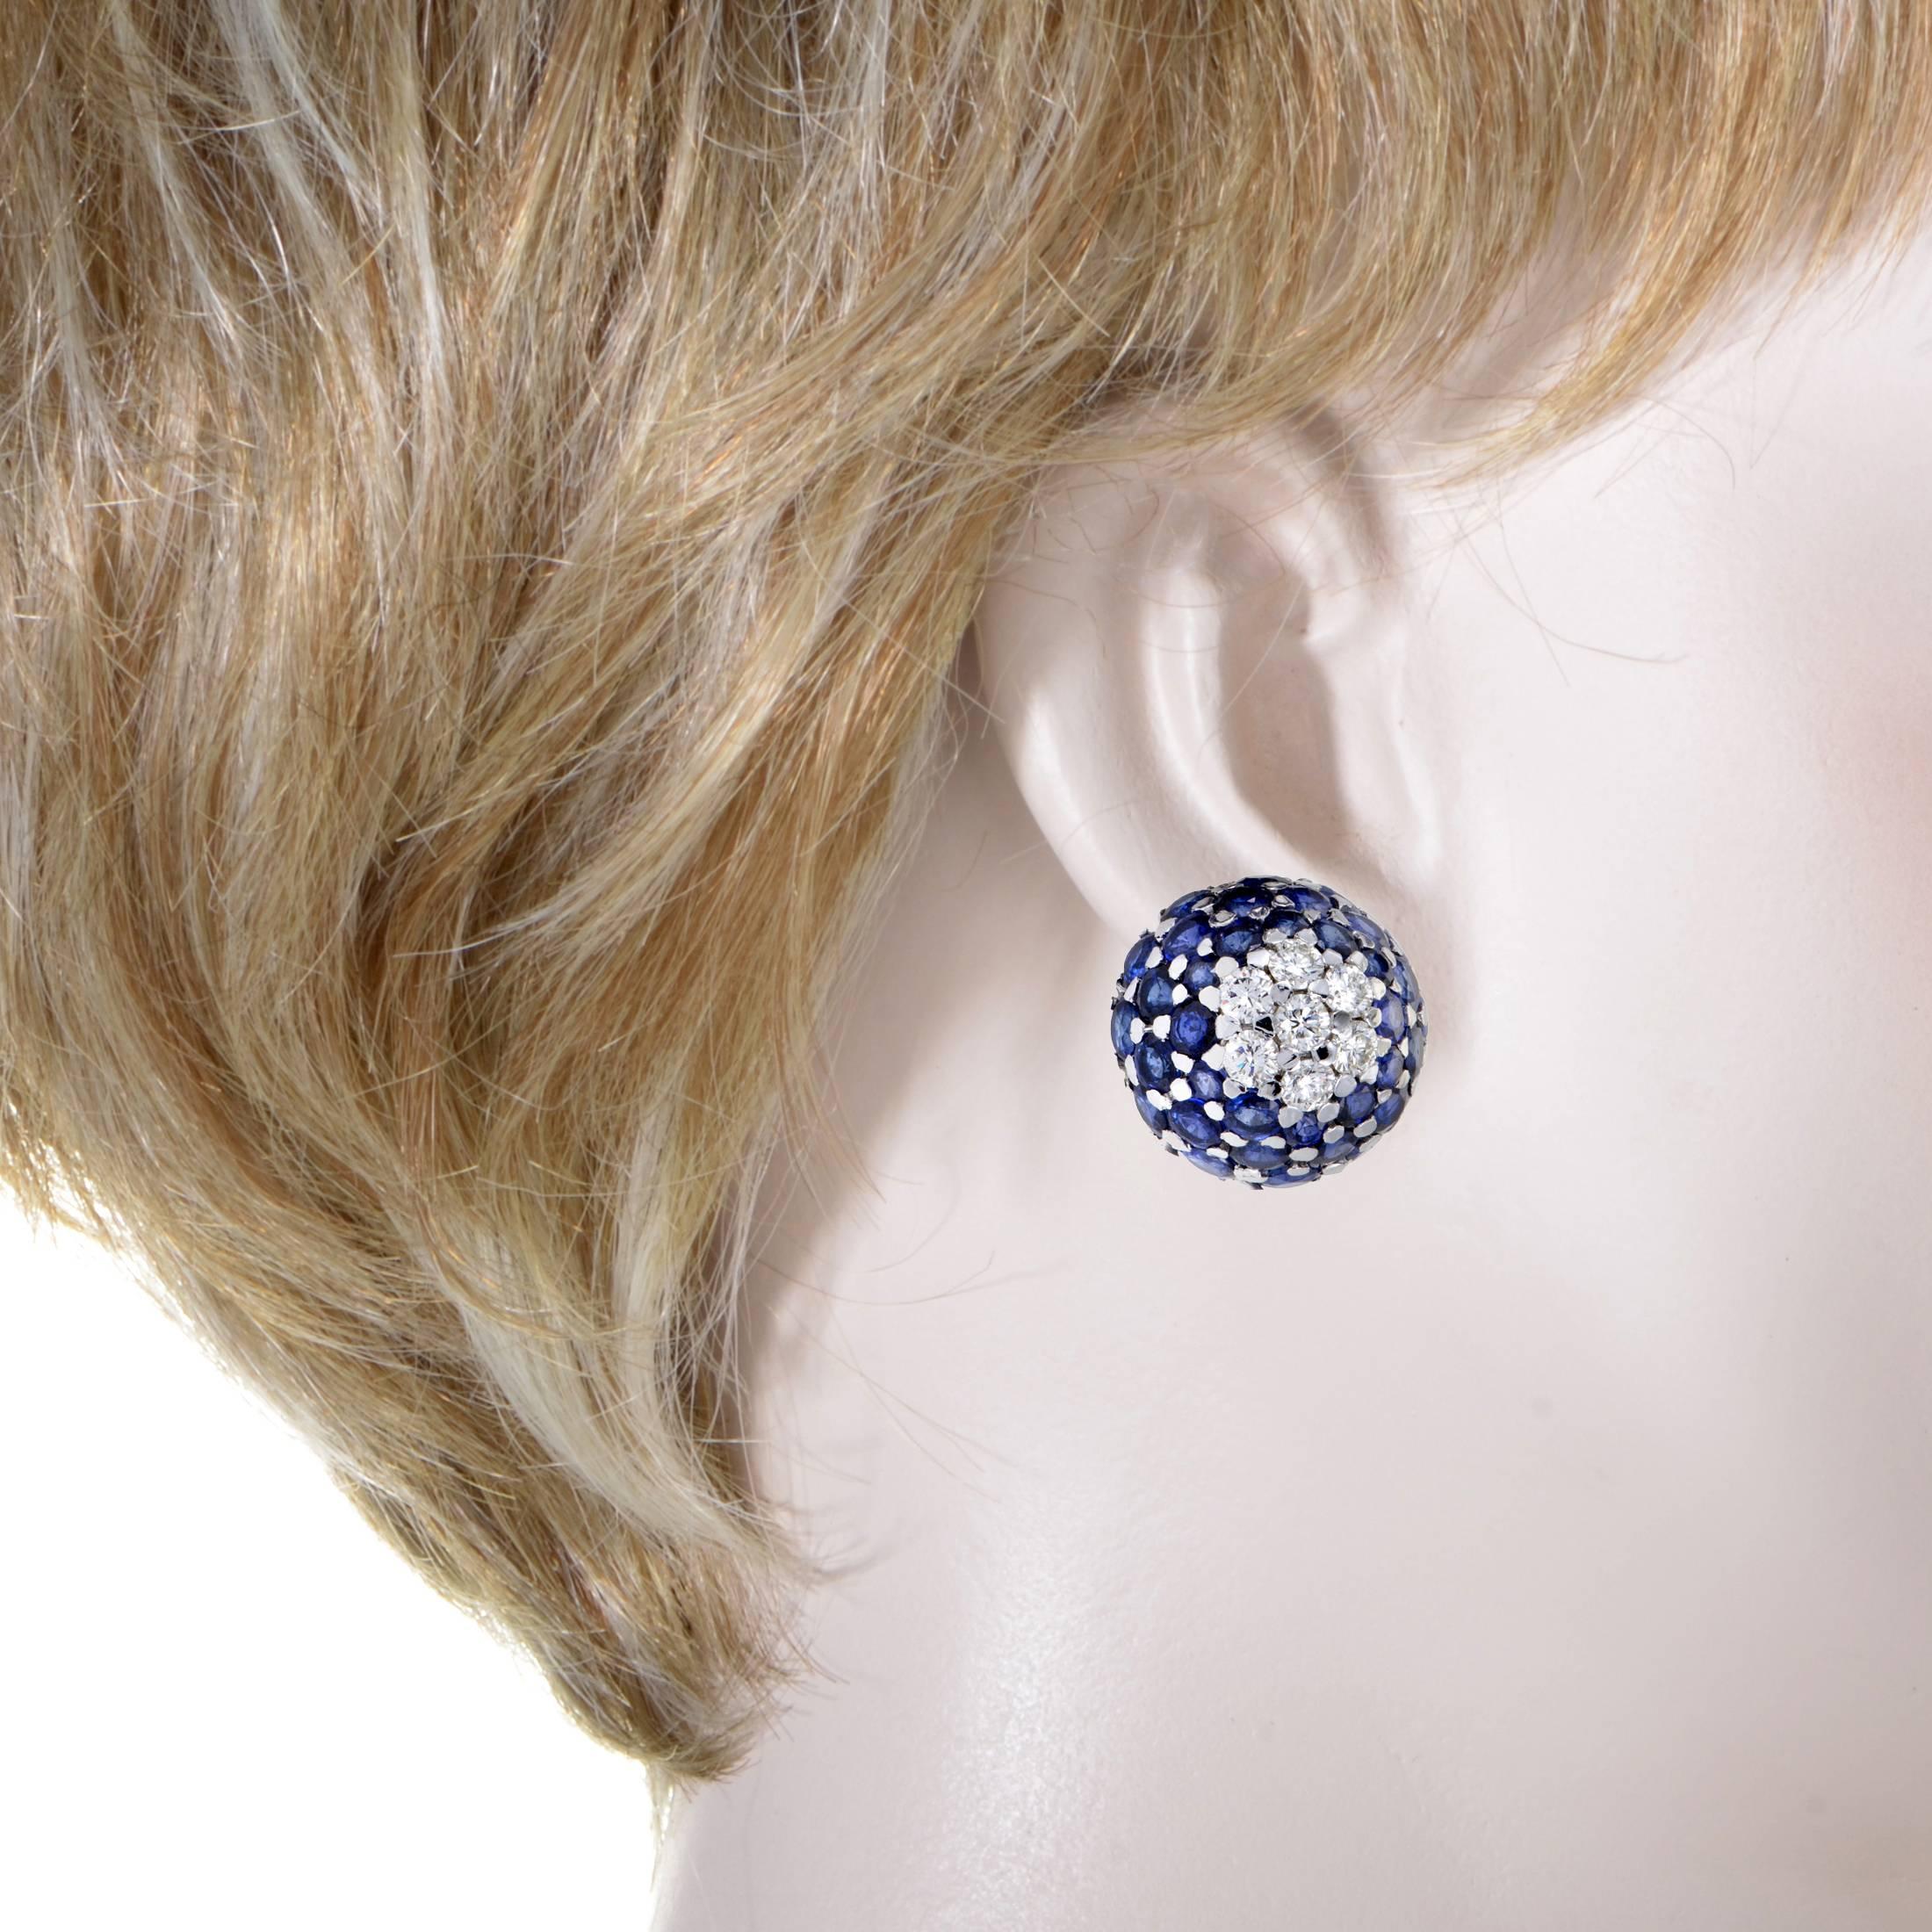 Incredibly stylish and extraordinarily embellished, these gorgeous earrings offer a delightfully feminine appearance. The pair is made of elegant 18K white gold and set with sparkly diamonds and stunning sapphires that total approximately 3.50 and